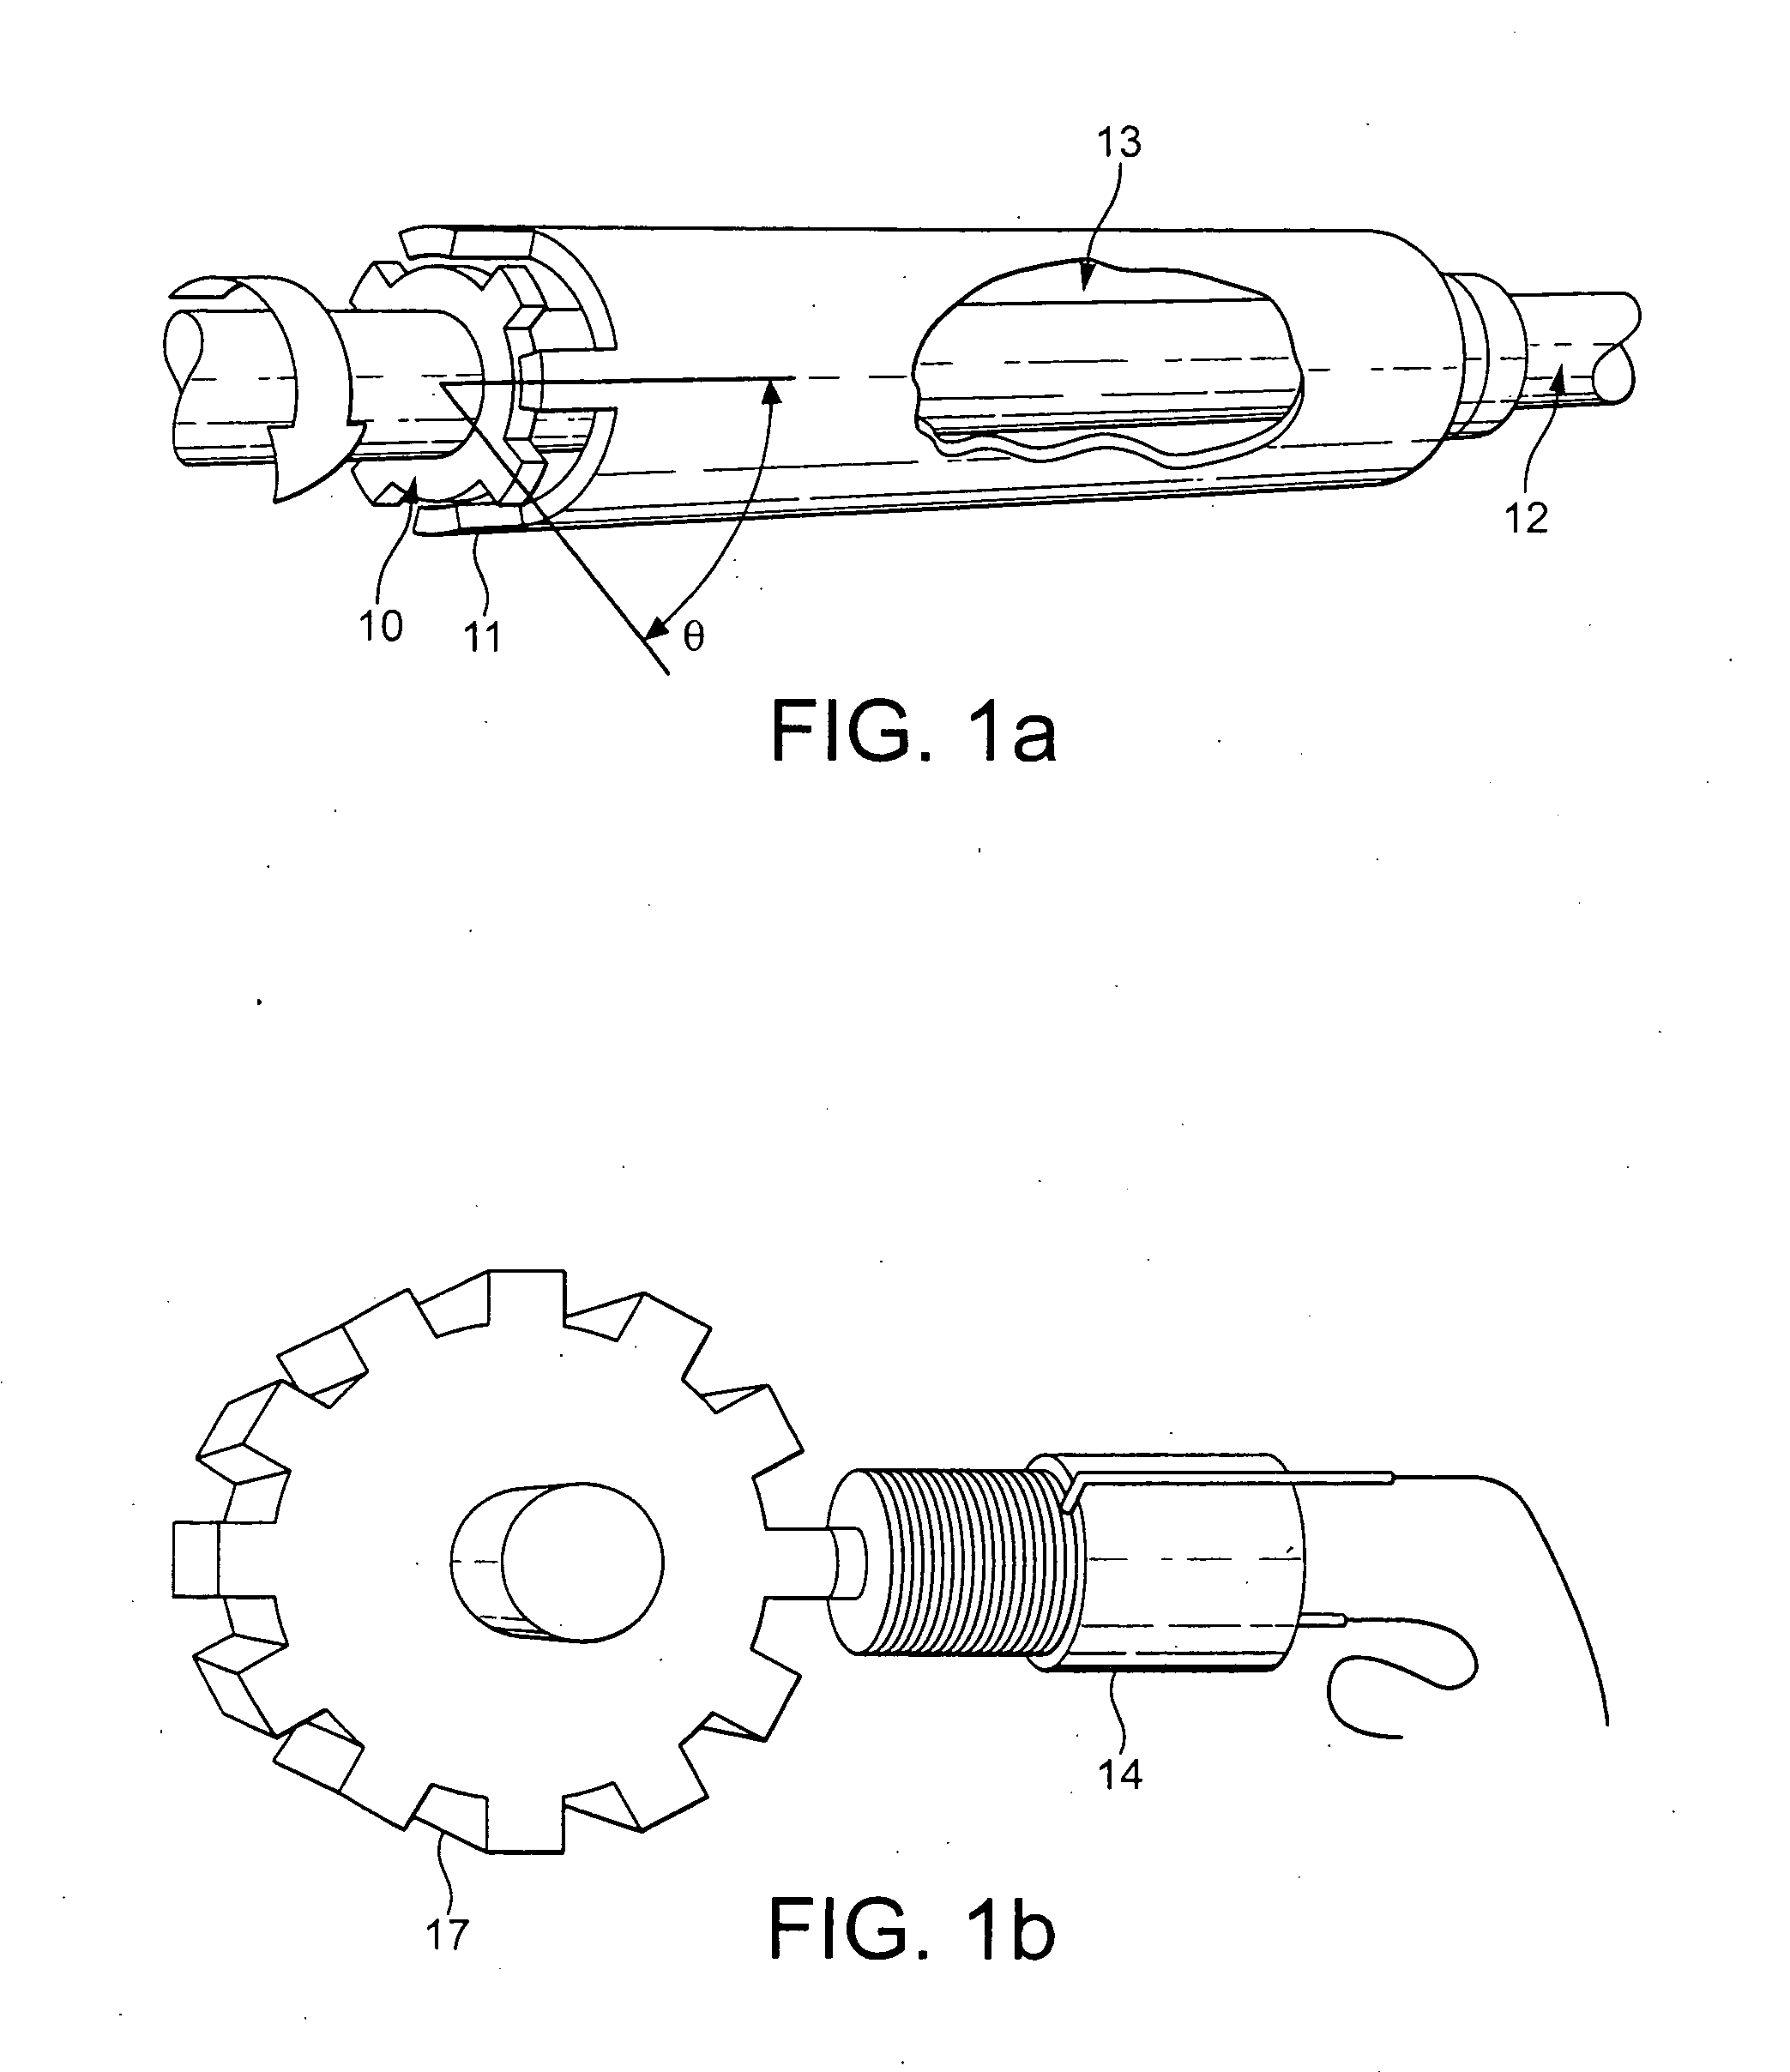 Speed or torque probe for gas turbine engines